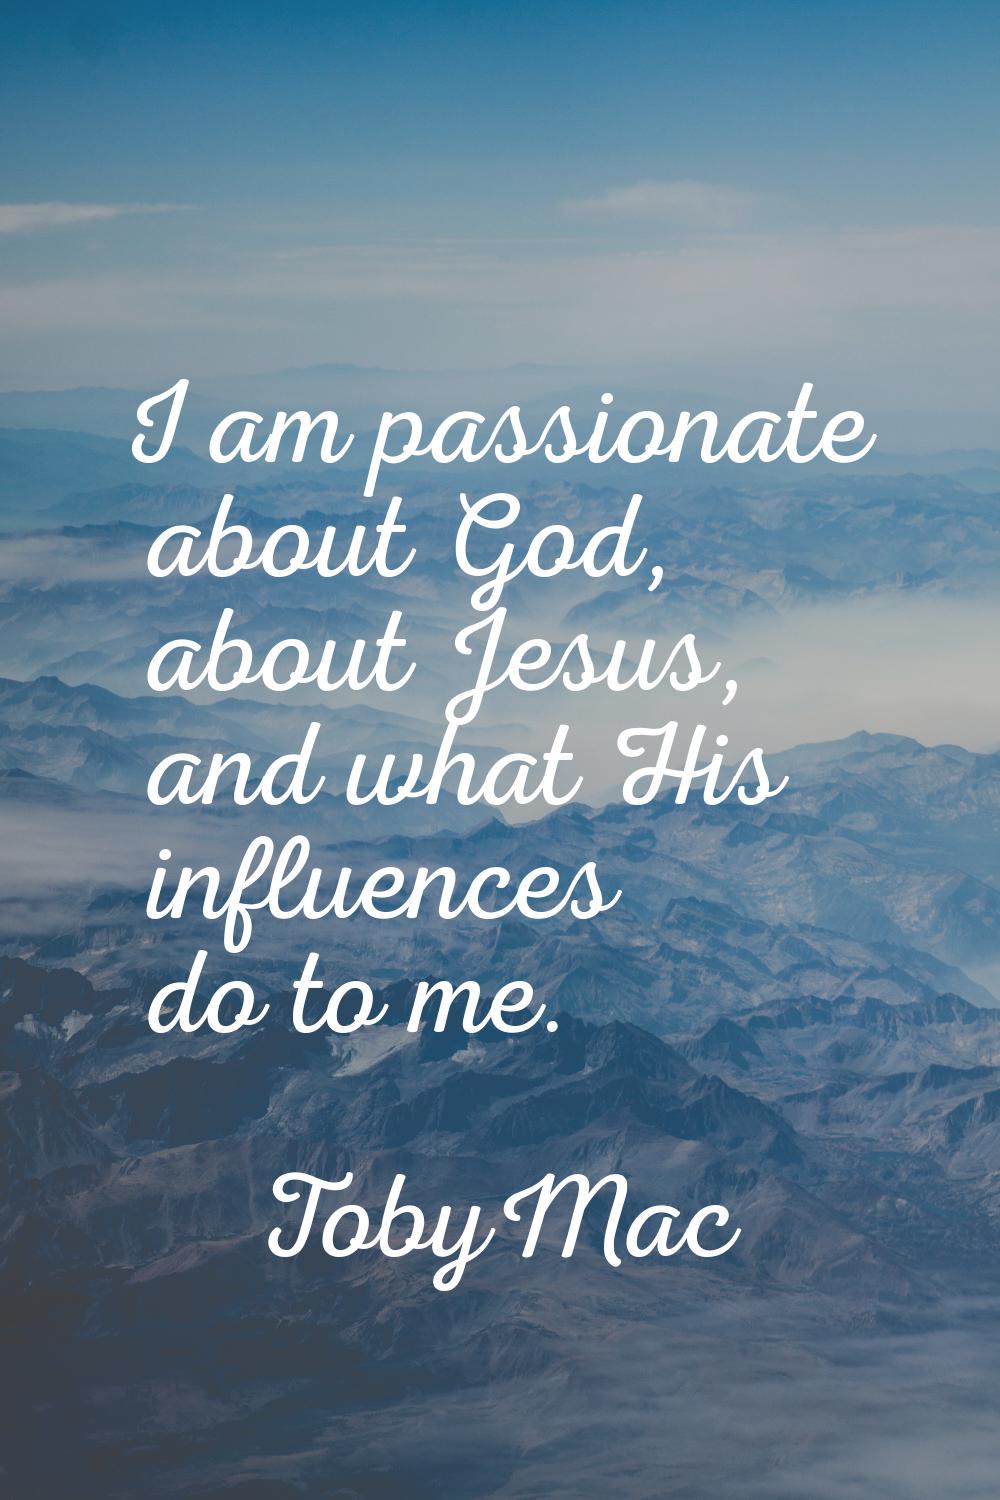 I am passionate about God, about Jesus, and what His influences do to me.